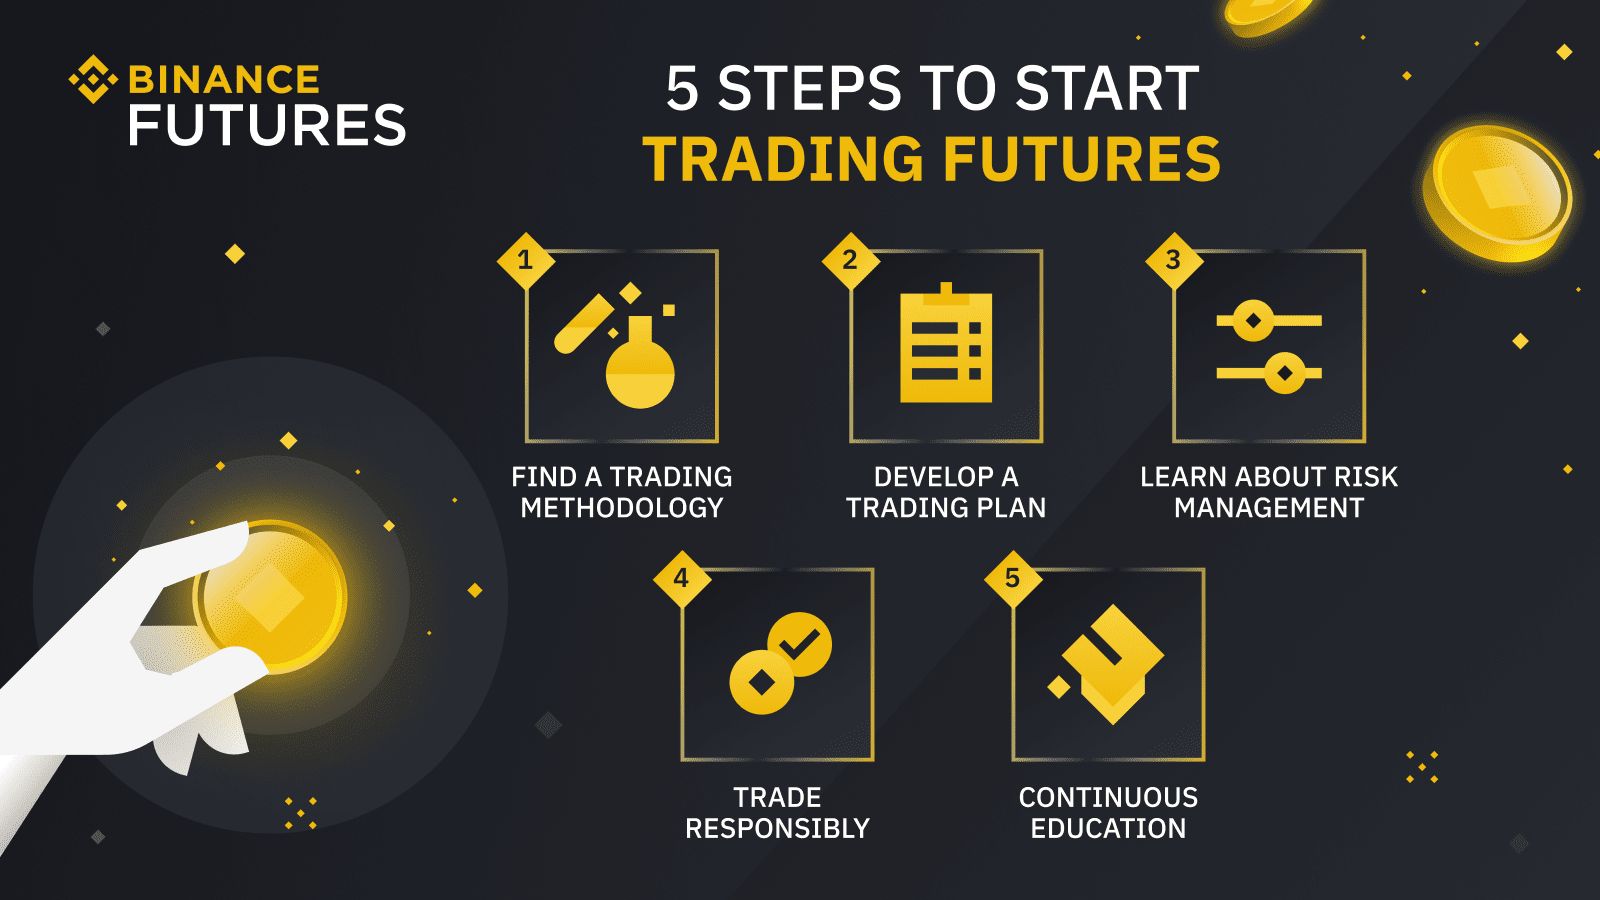 How To Start Trading Futures